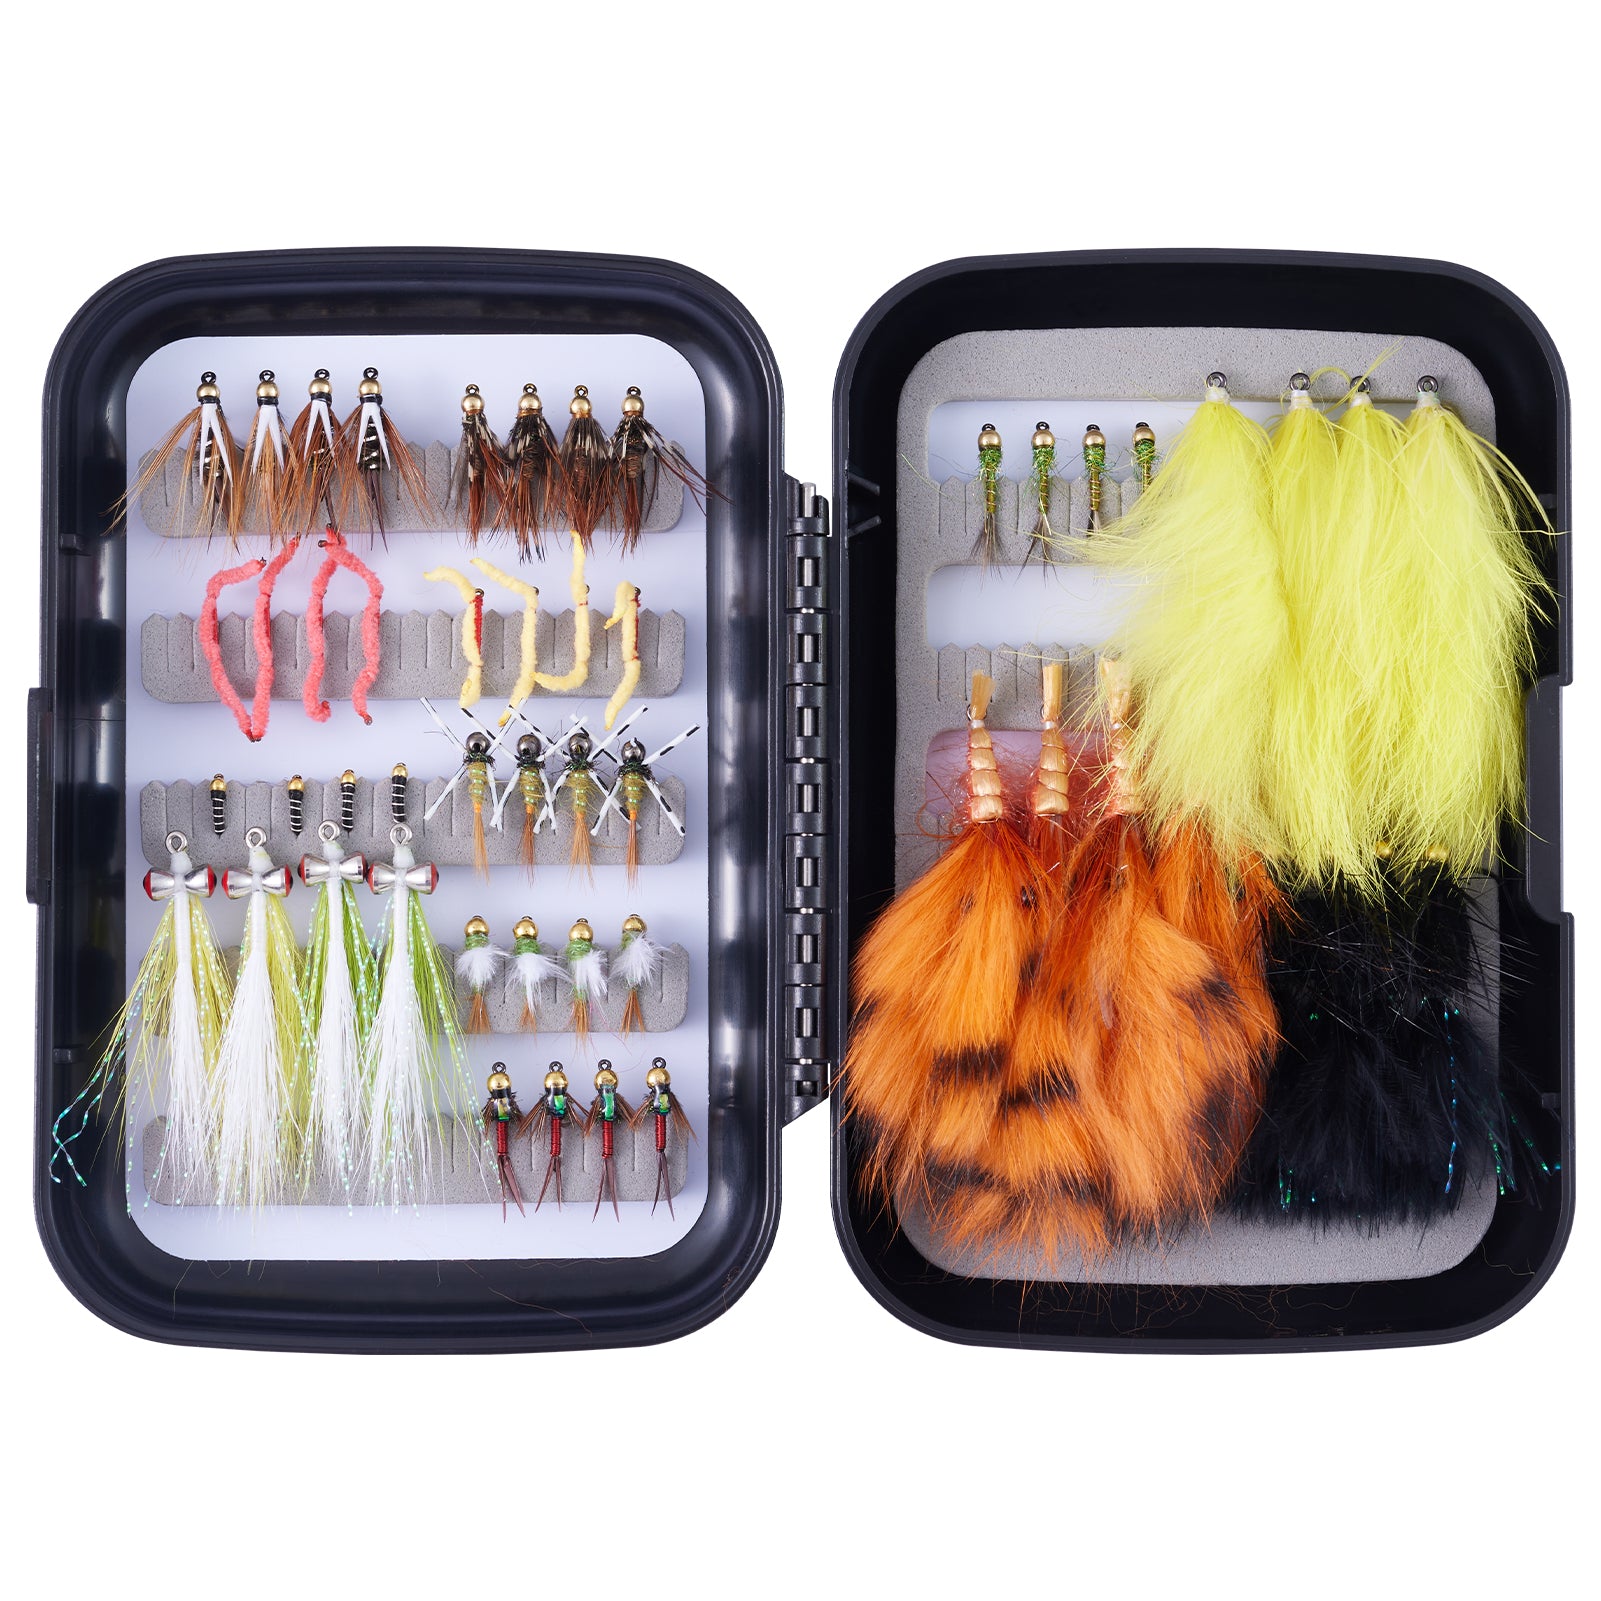 52-Piece Wet Flies Assortment Fly Nymphs and Streamers with Fly Box - 52pcs  Nymphs & Streamers Assortment